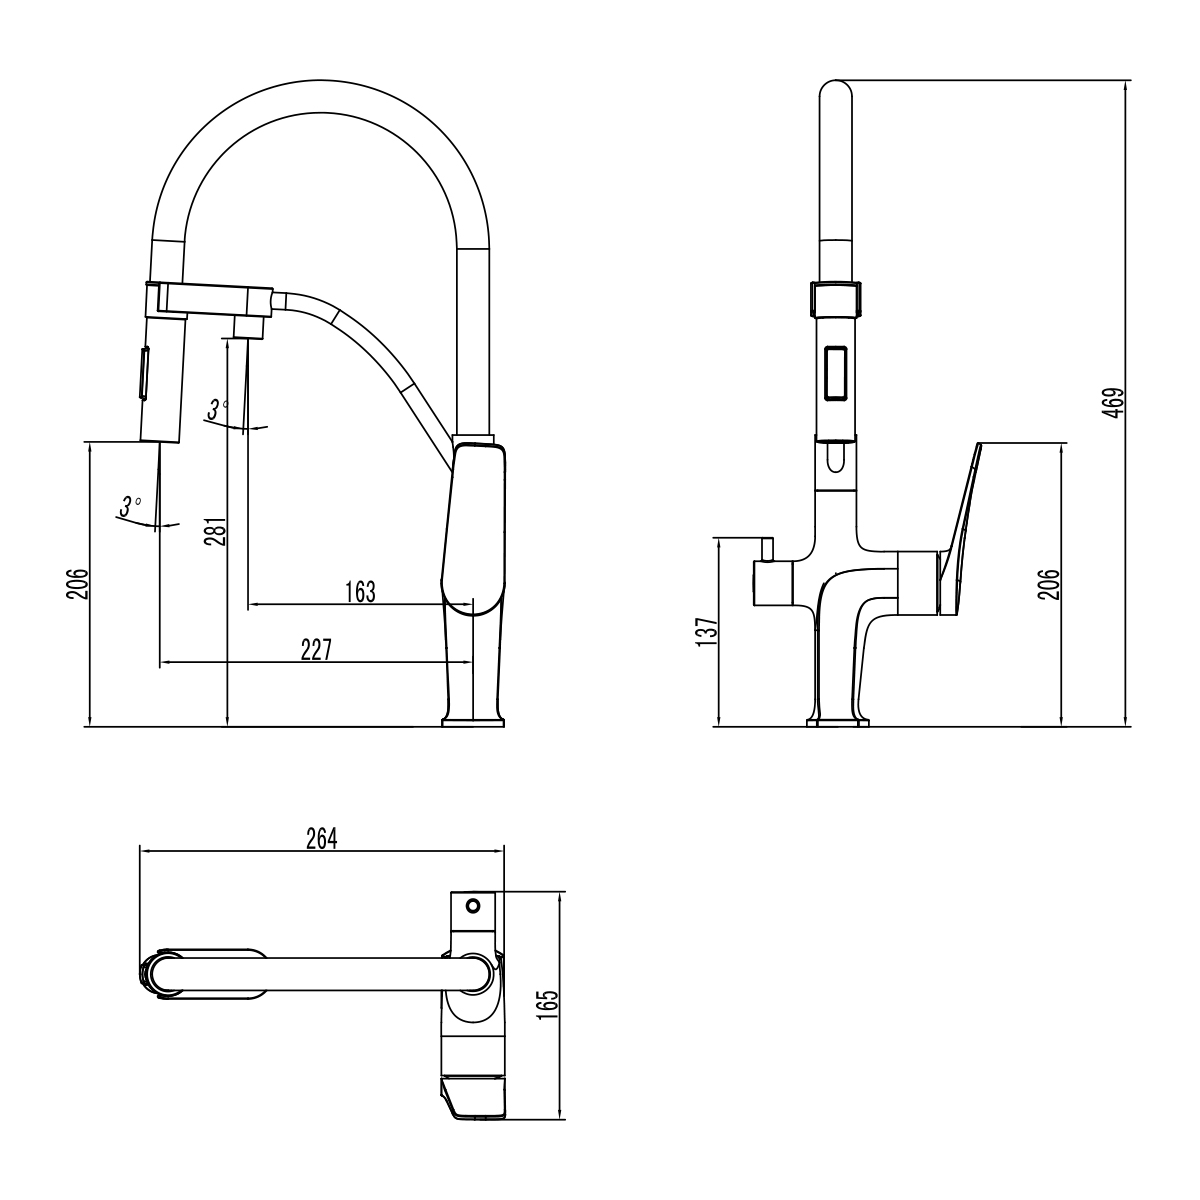 LM3761BL Kitchen faucet
with connection to drinking water supply